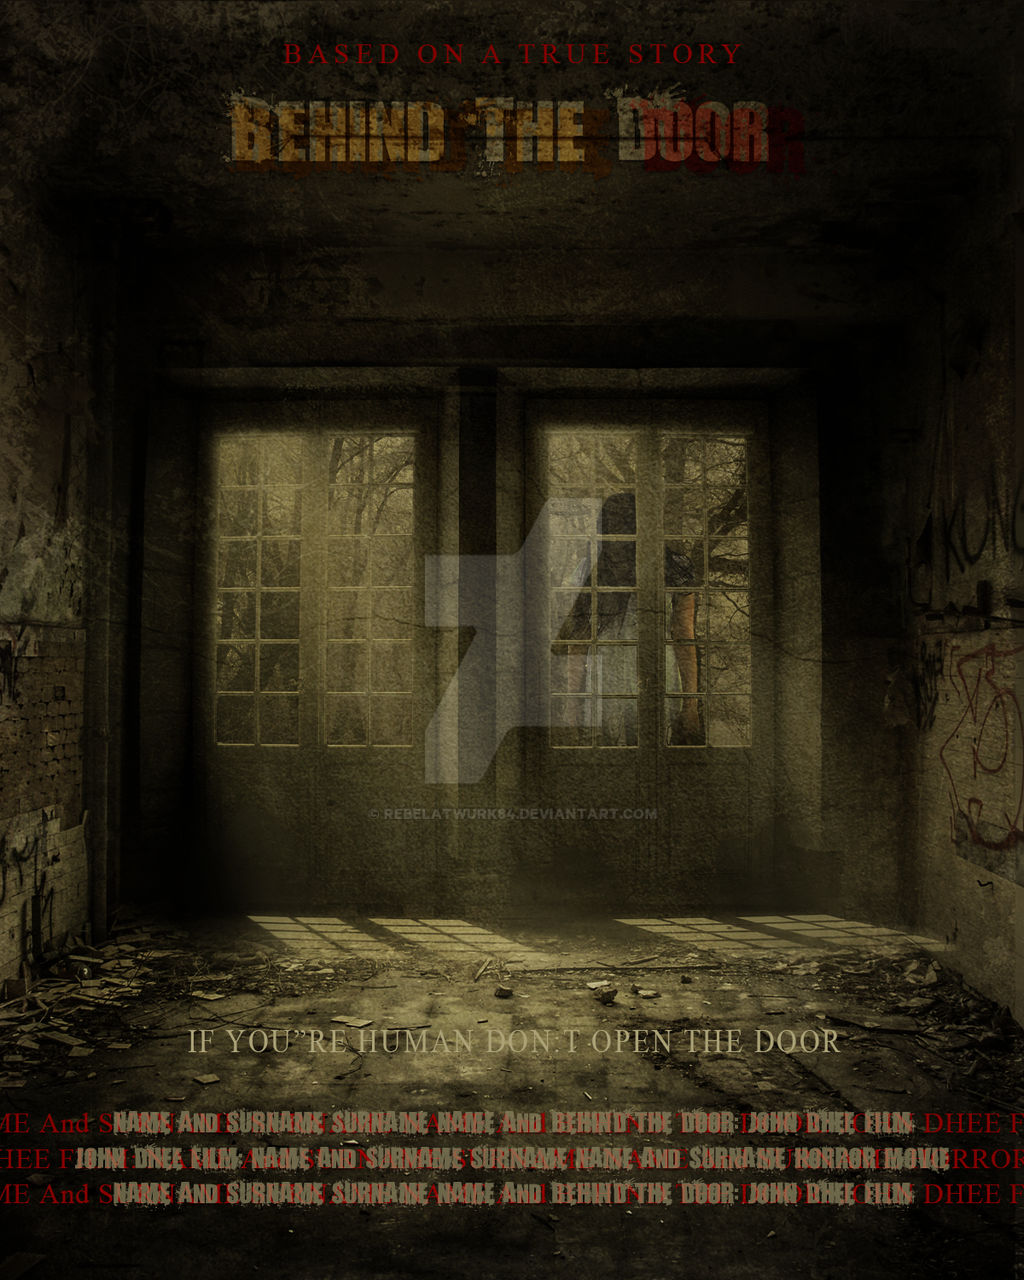 The Backrooms - Concept Movie Poster by BenRothrock on DeviantArt